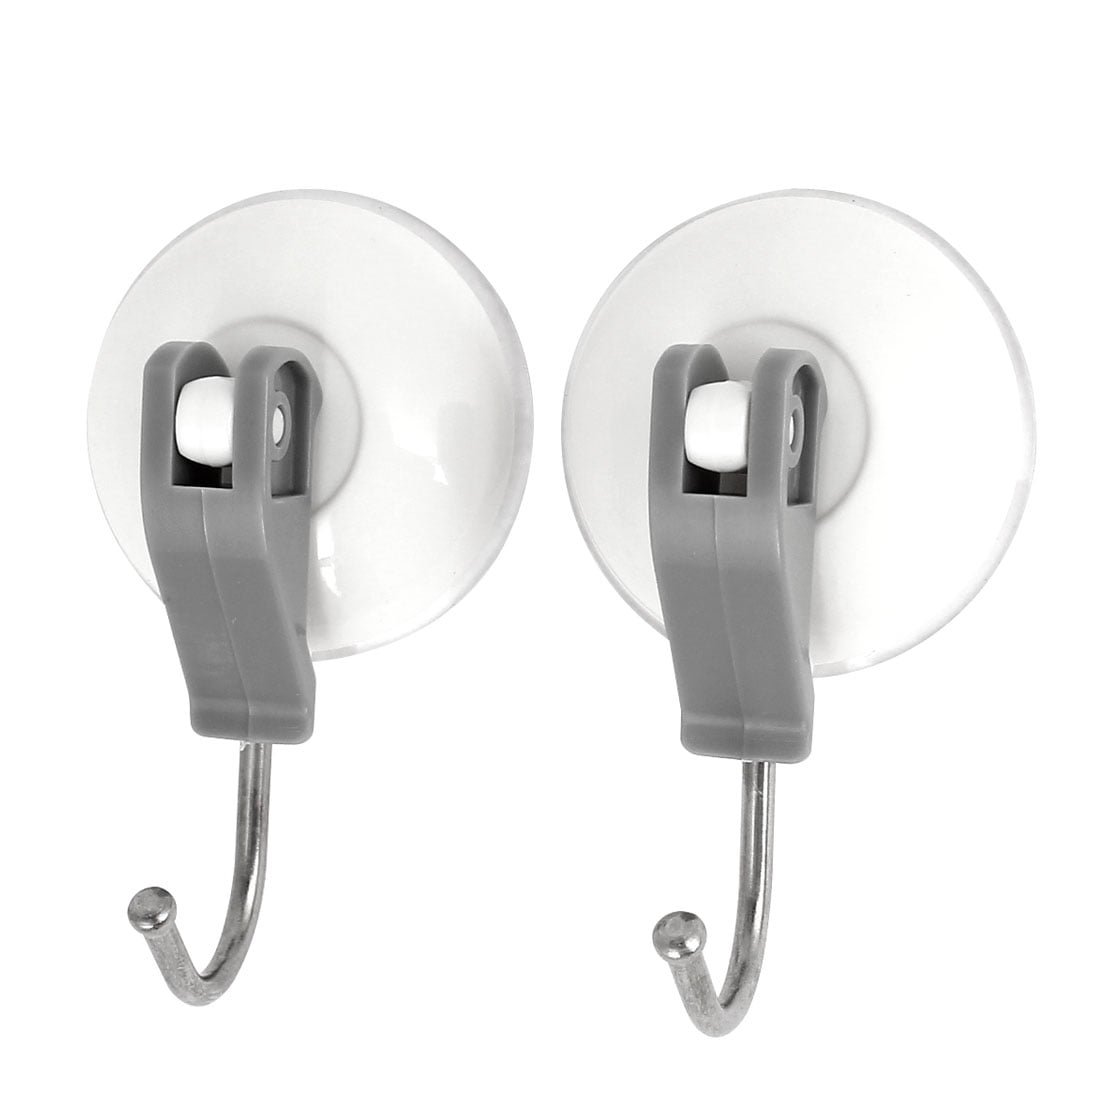 Buy SFTlite Suction Hook [2 Pack] Vacuum Suction Cup Hooks Wall